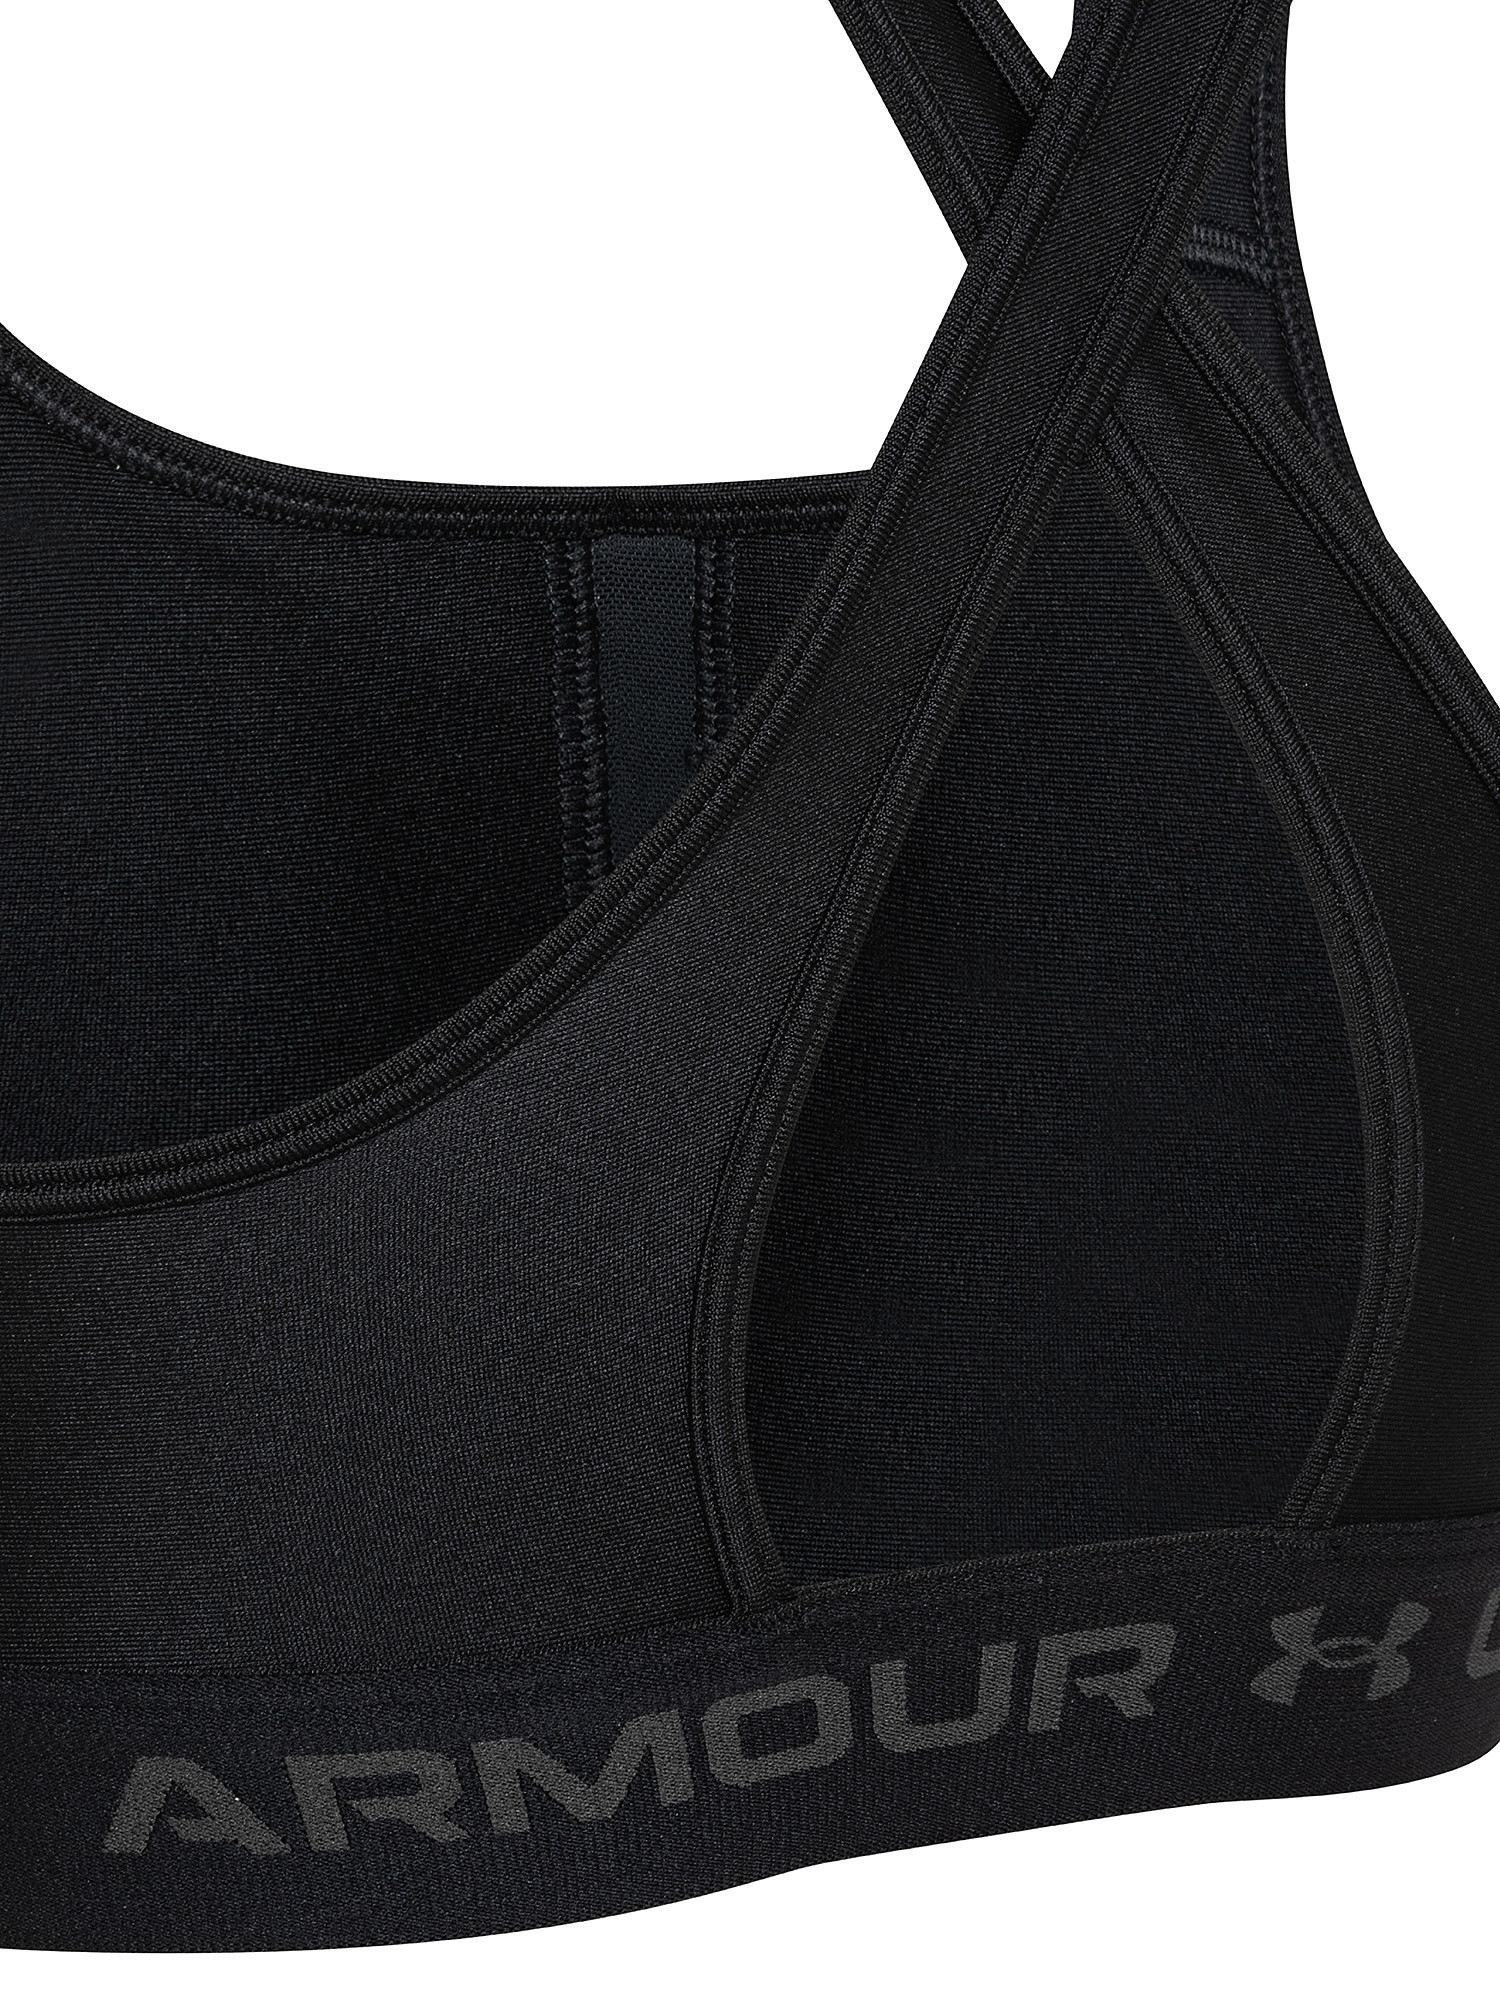 Armour® Mid Crossbac sports bra, Black, large image number 2